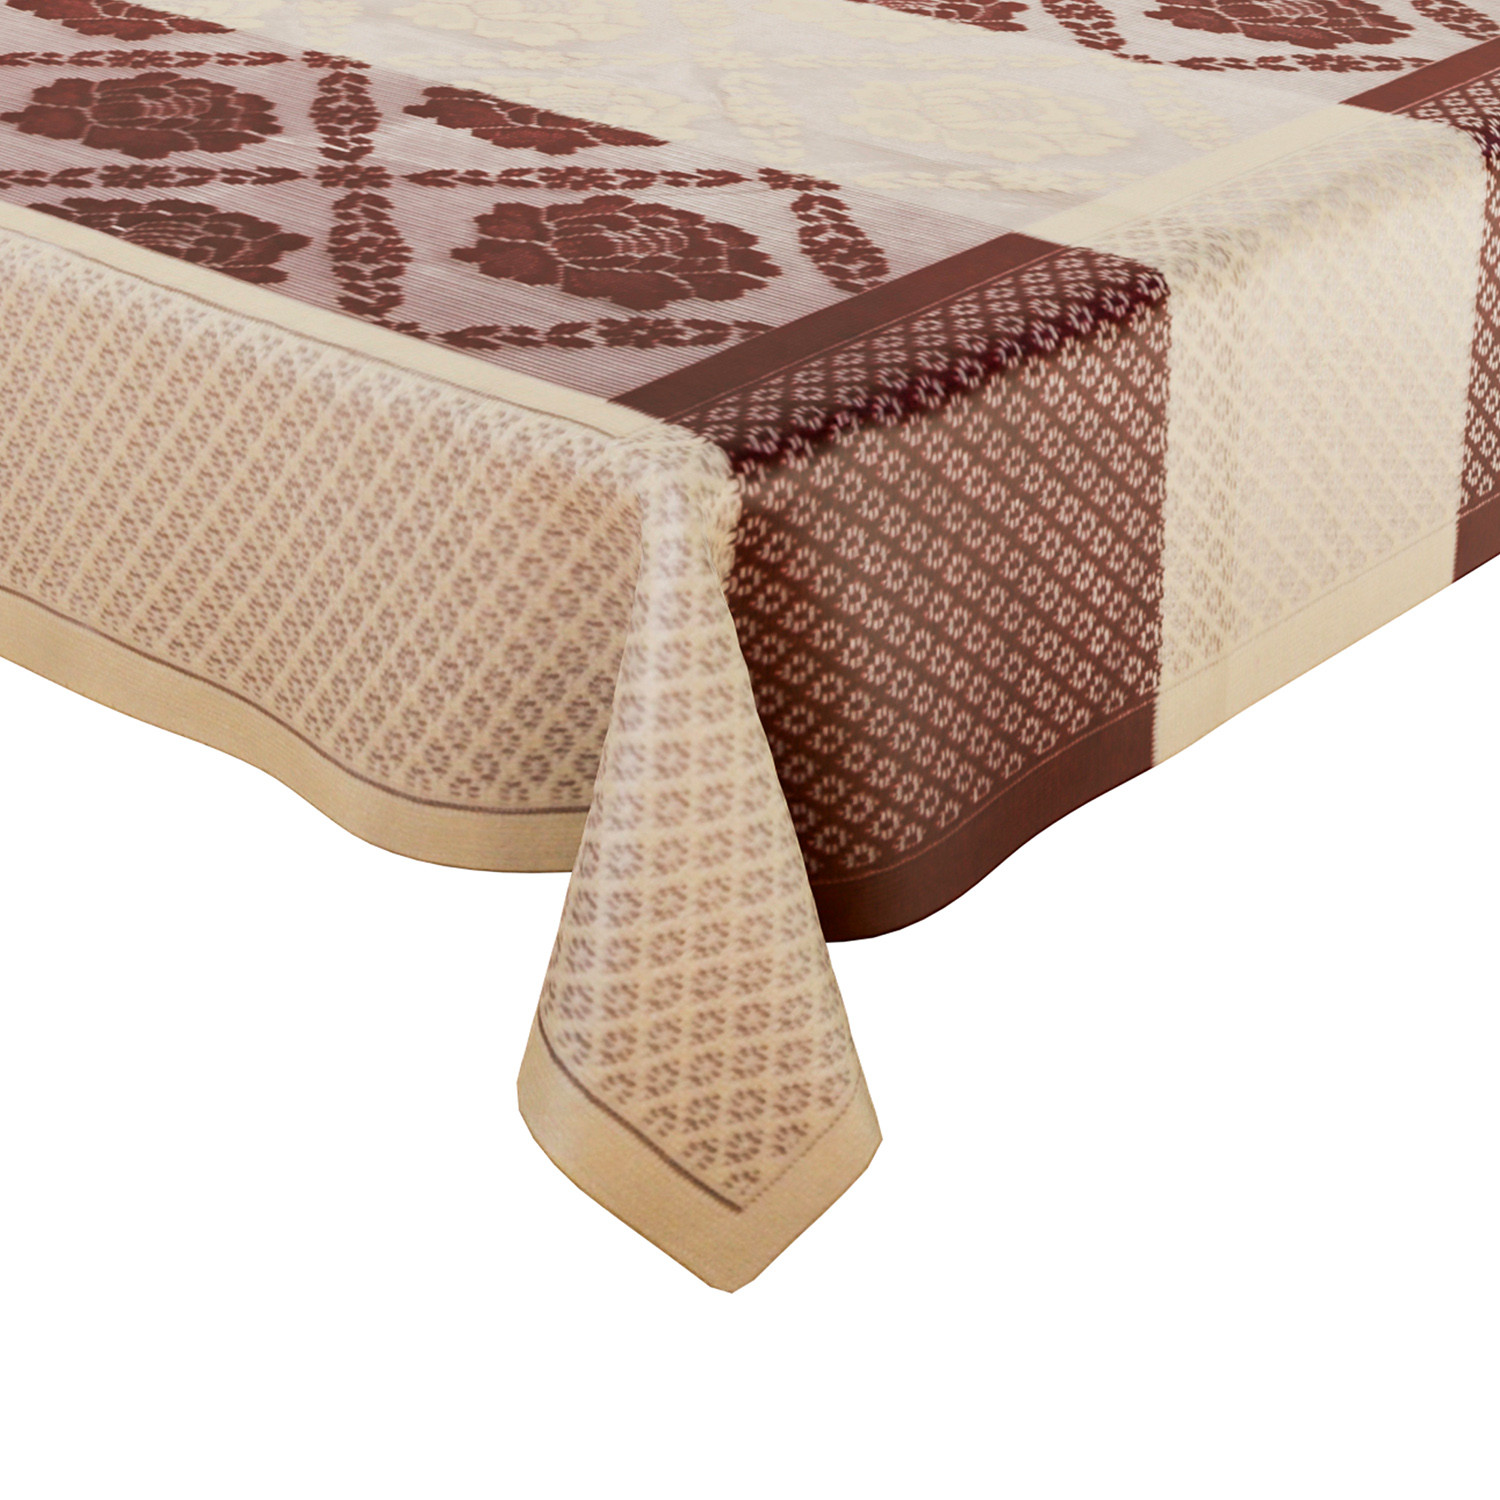 Kuber Industries Center Table Cover|Net Table Cloth Dust-Proof Table Cover|Cotton Flower Patta Design Table Cover|40x60 Inch (Maroon & Cream)